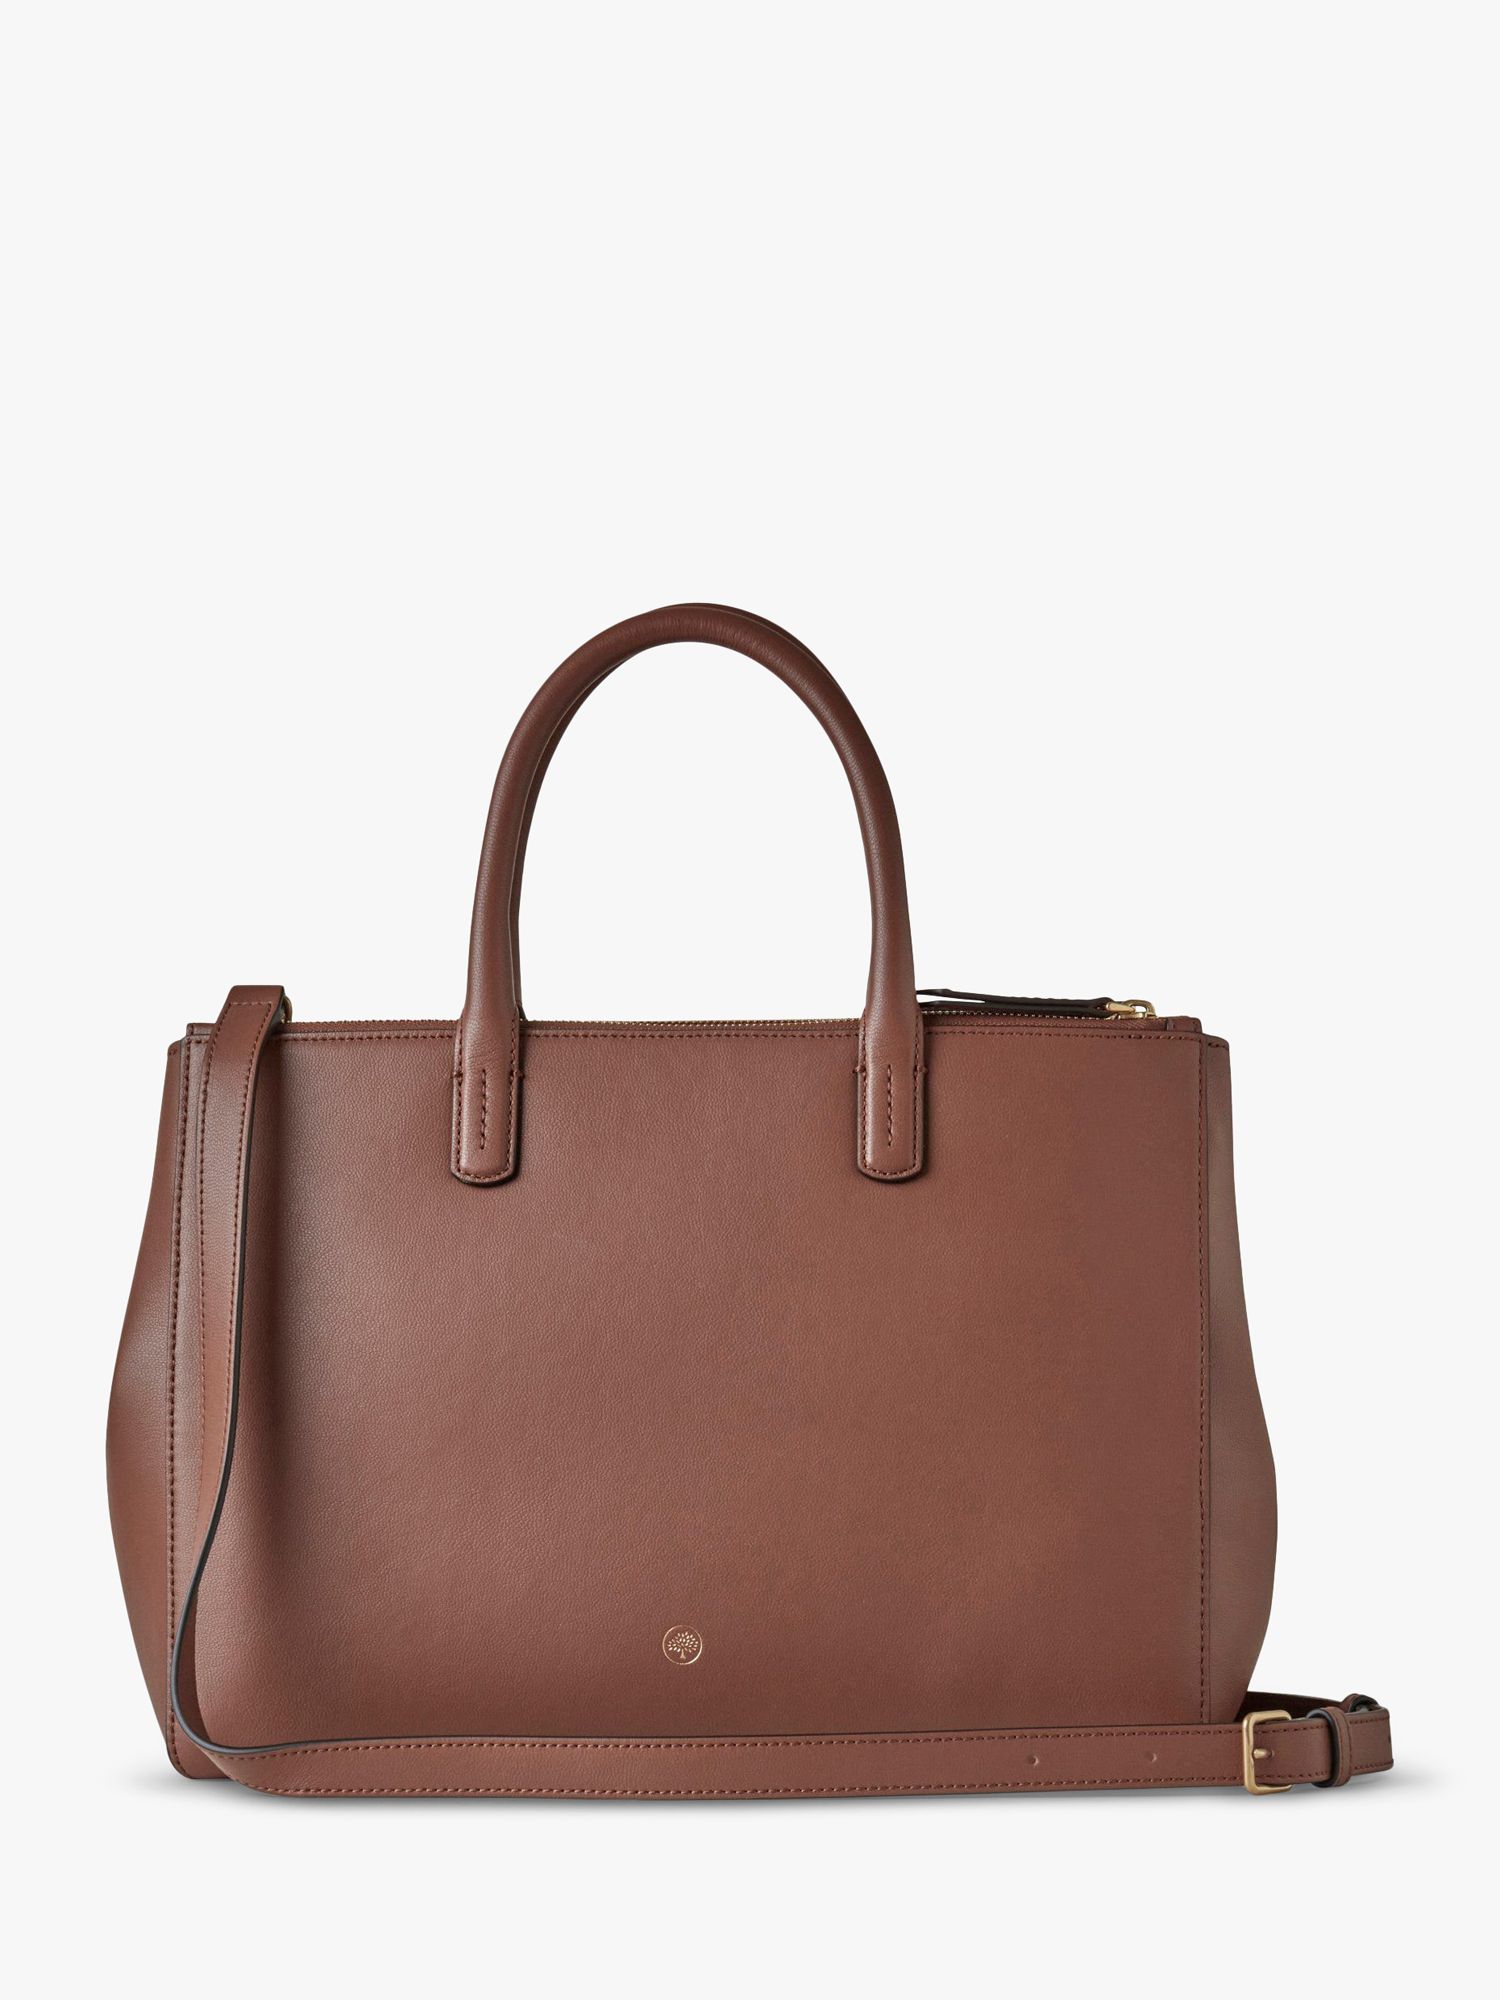 Buy Mulberry M Zipped Micro Classic Grain Leather Top Handle Tote Bag Online at johnlewis.com